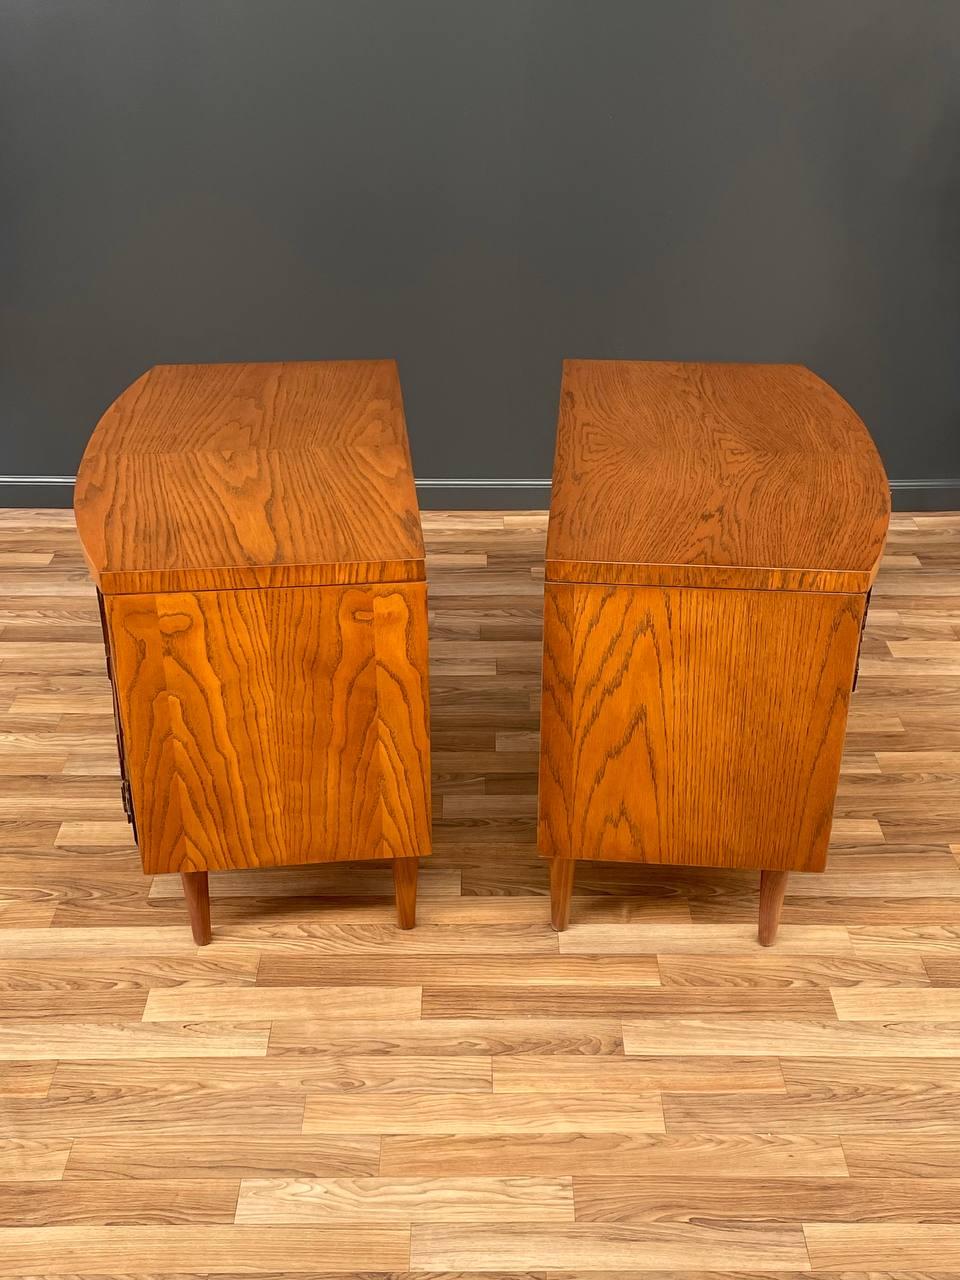 Newly Refinished - Pair of Mid-Century Modern Brutalist Night Stands by Lane 1